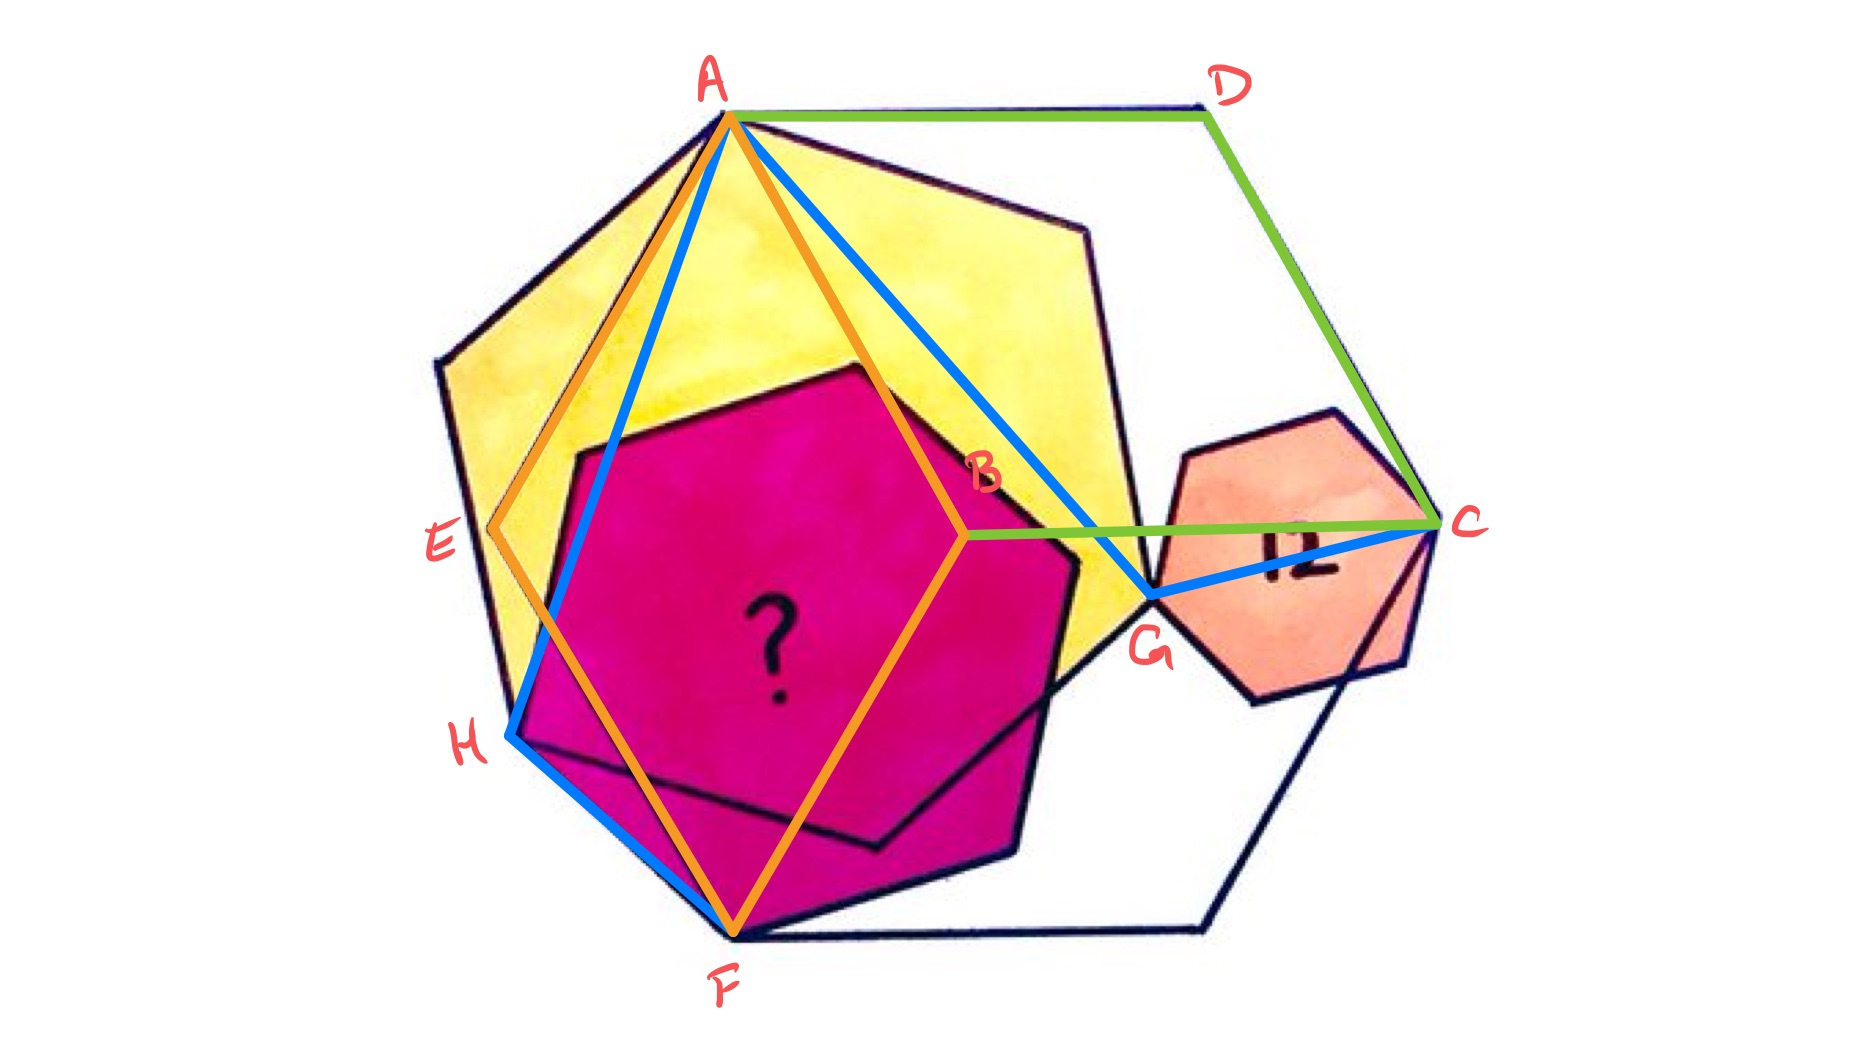 Four hexagons labelled